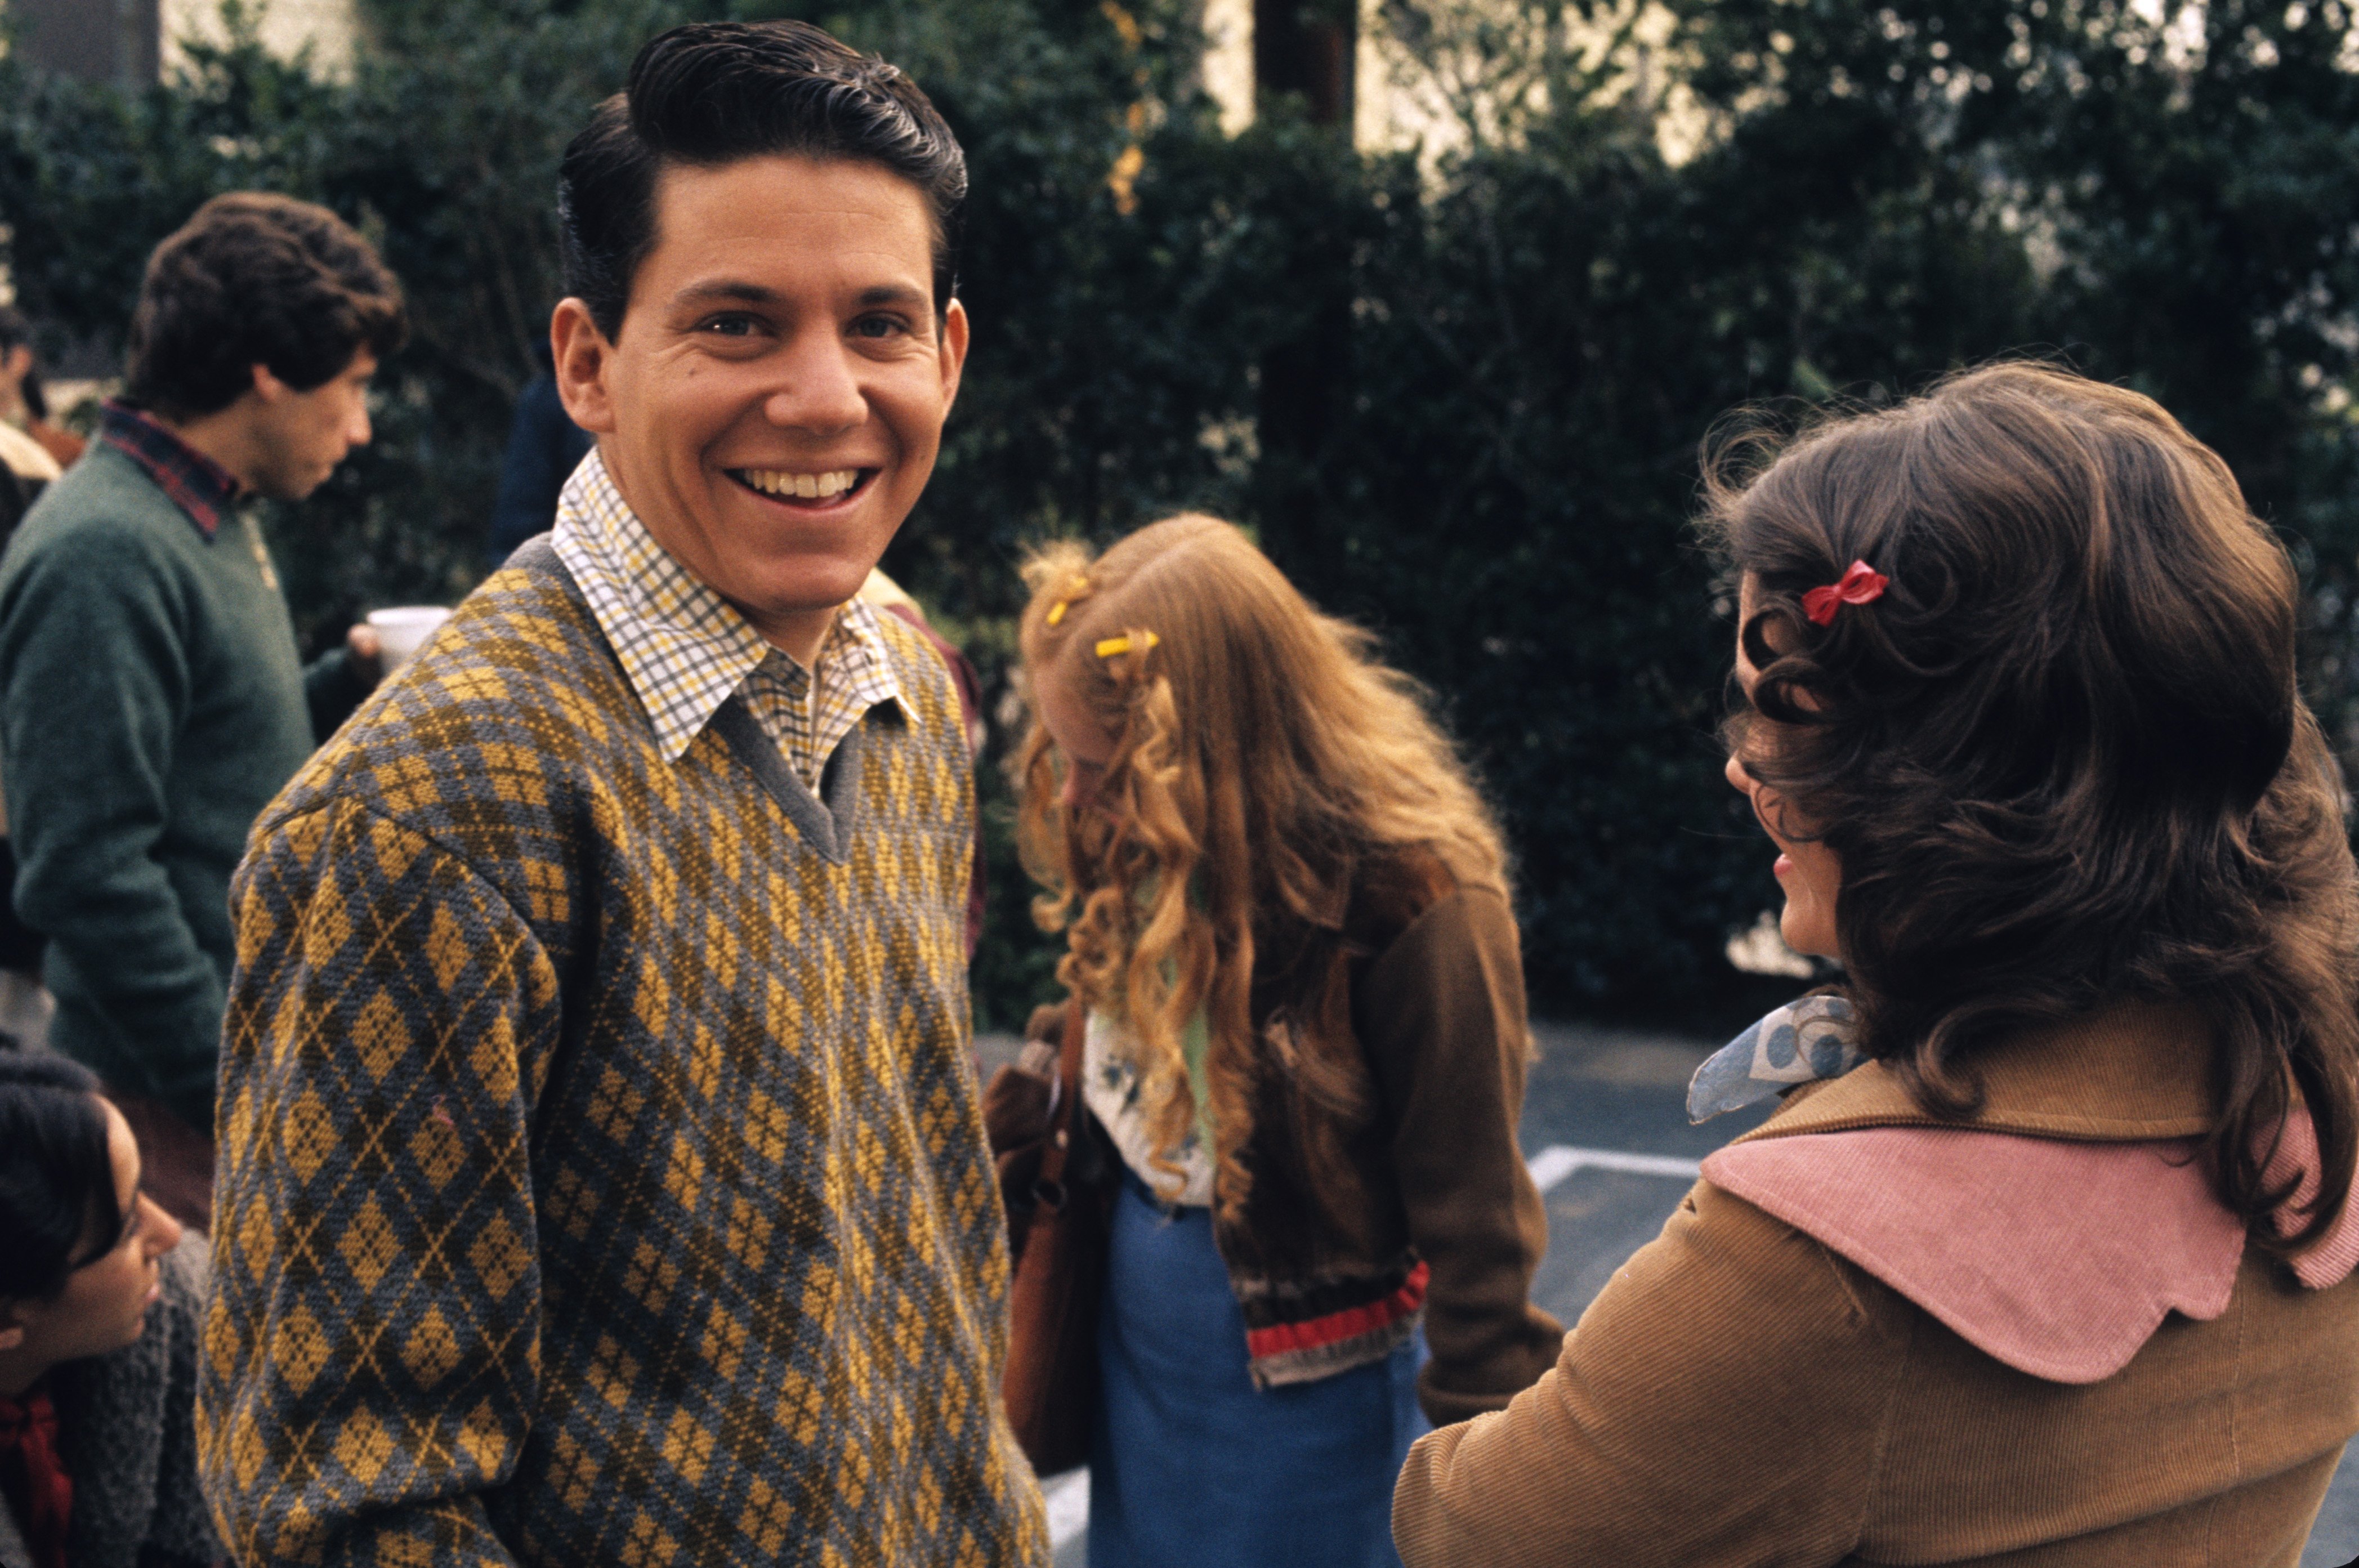 Anson Williams in the episode "Fonzie Drops In" on "Happy Days" | Source: Getty Images